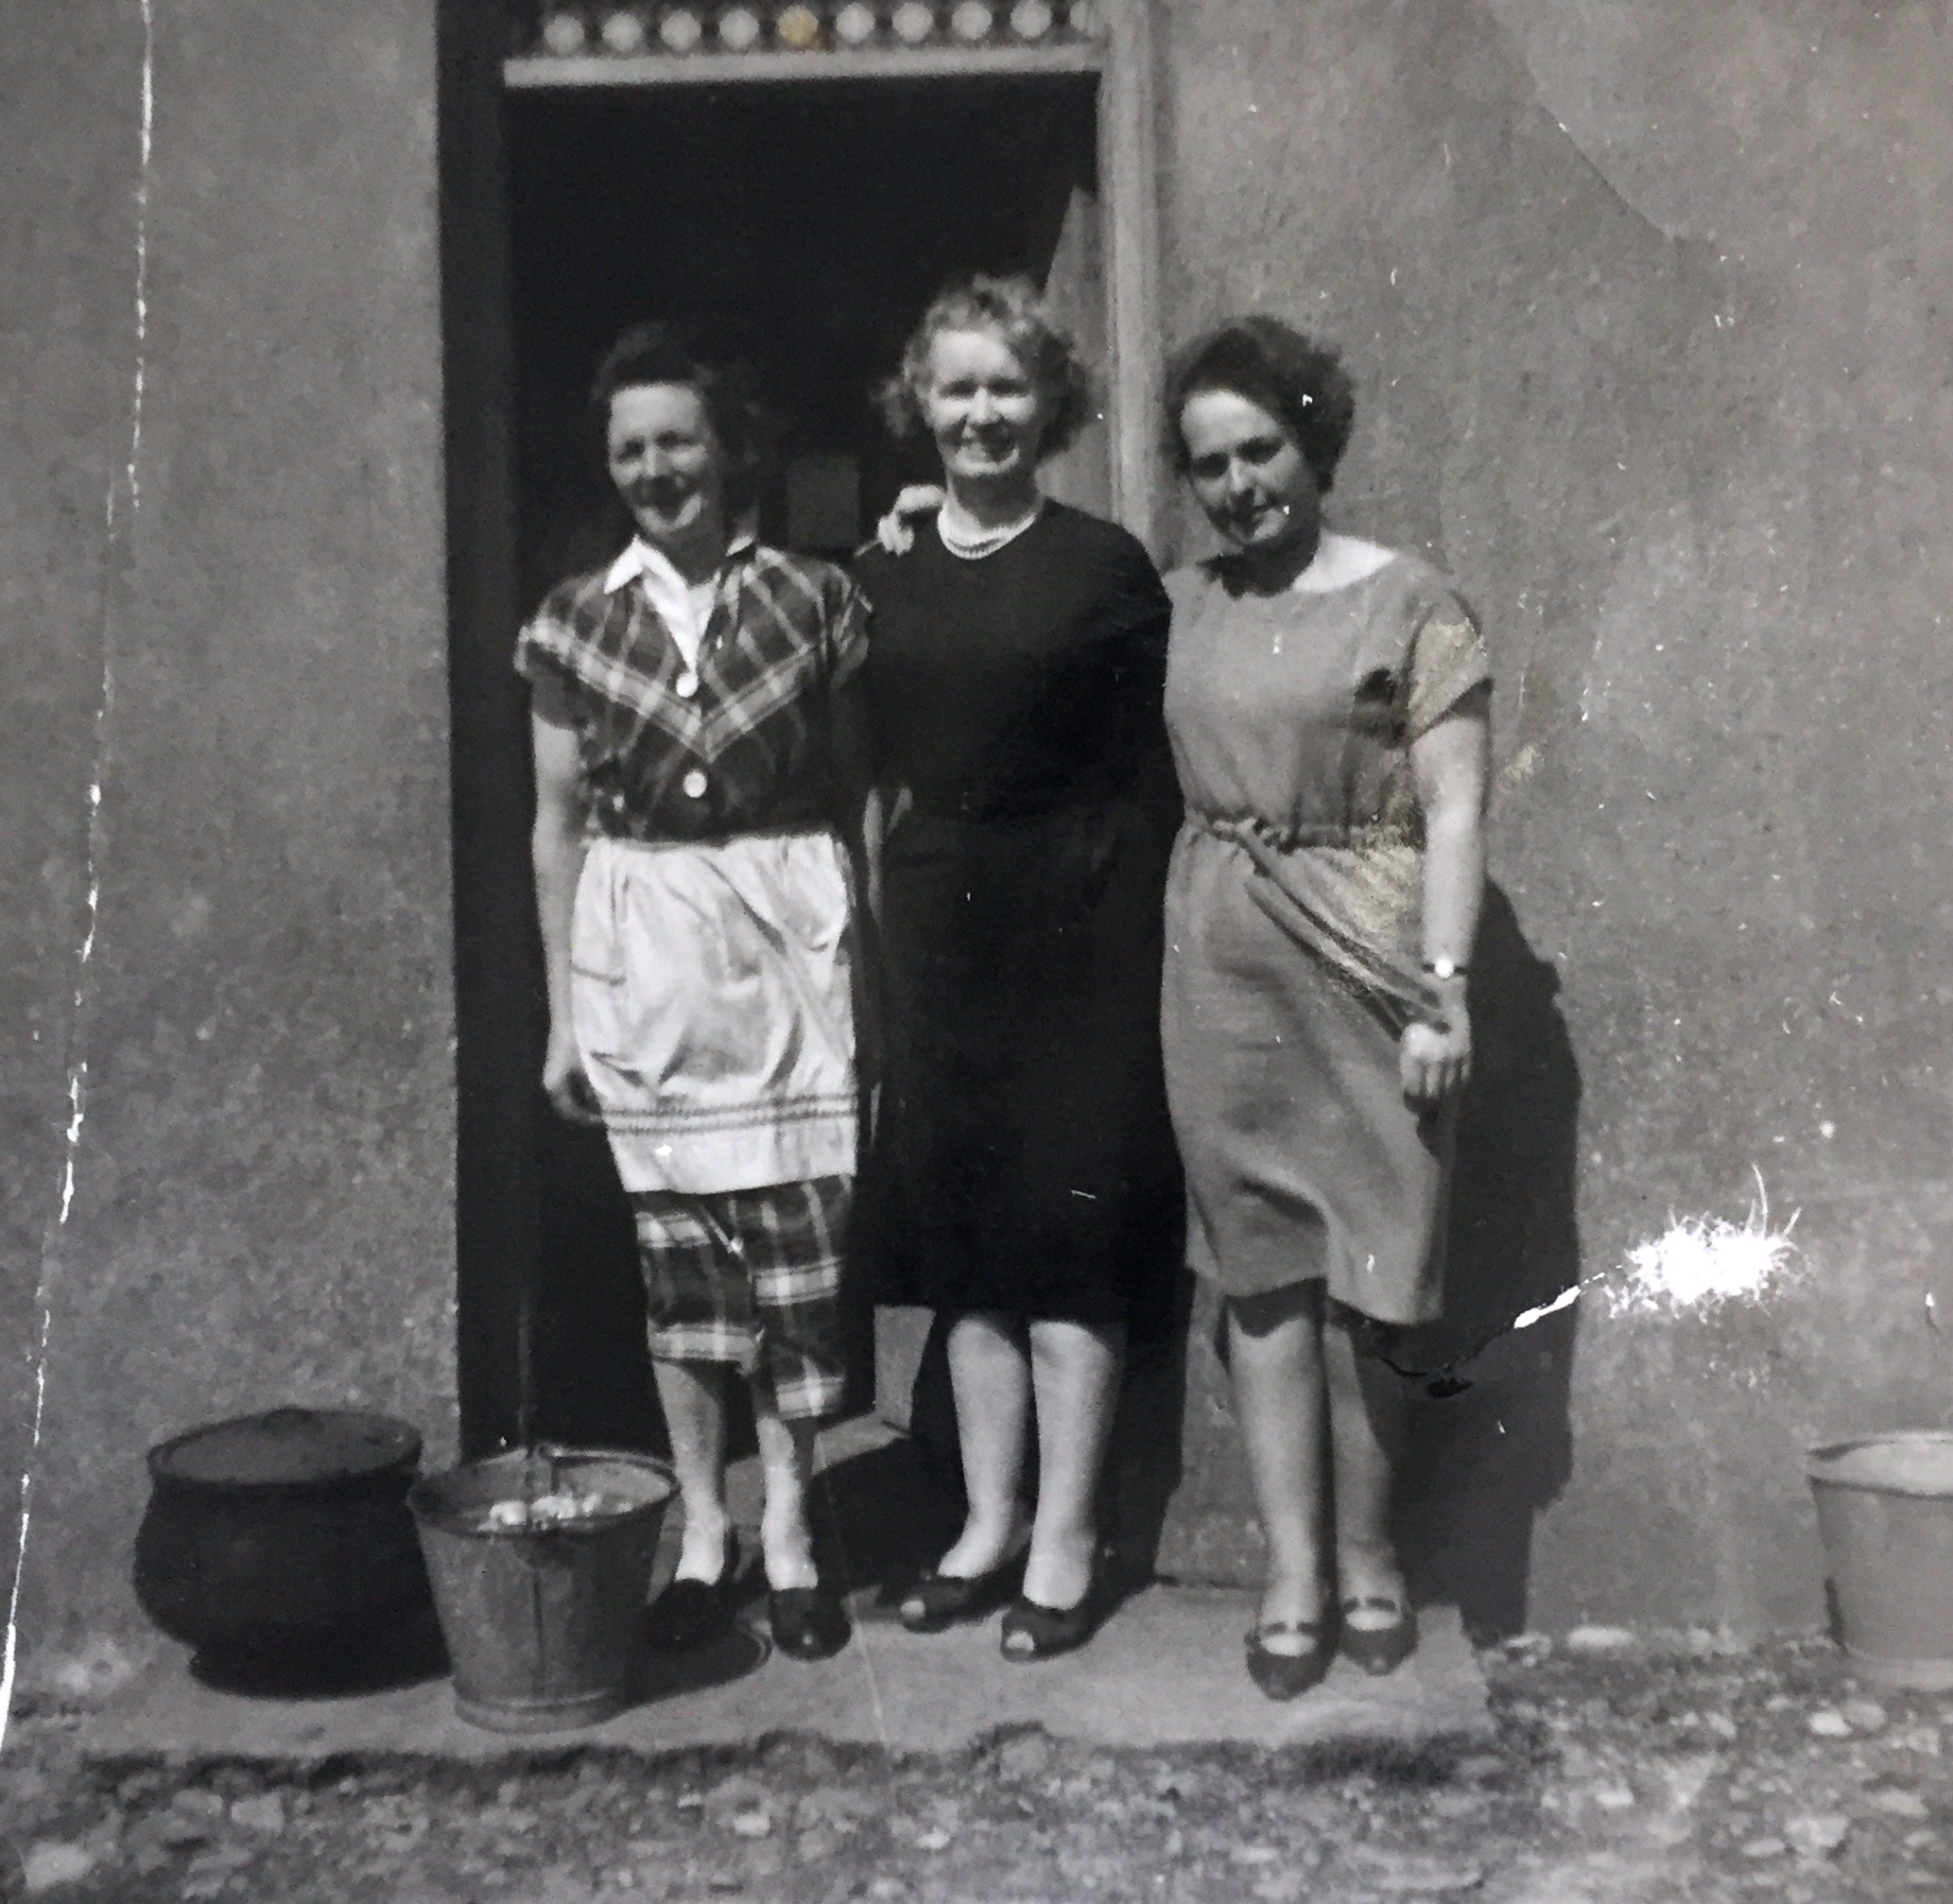 Madge, Aunt Margaret and Claire
About 1958?